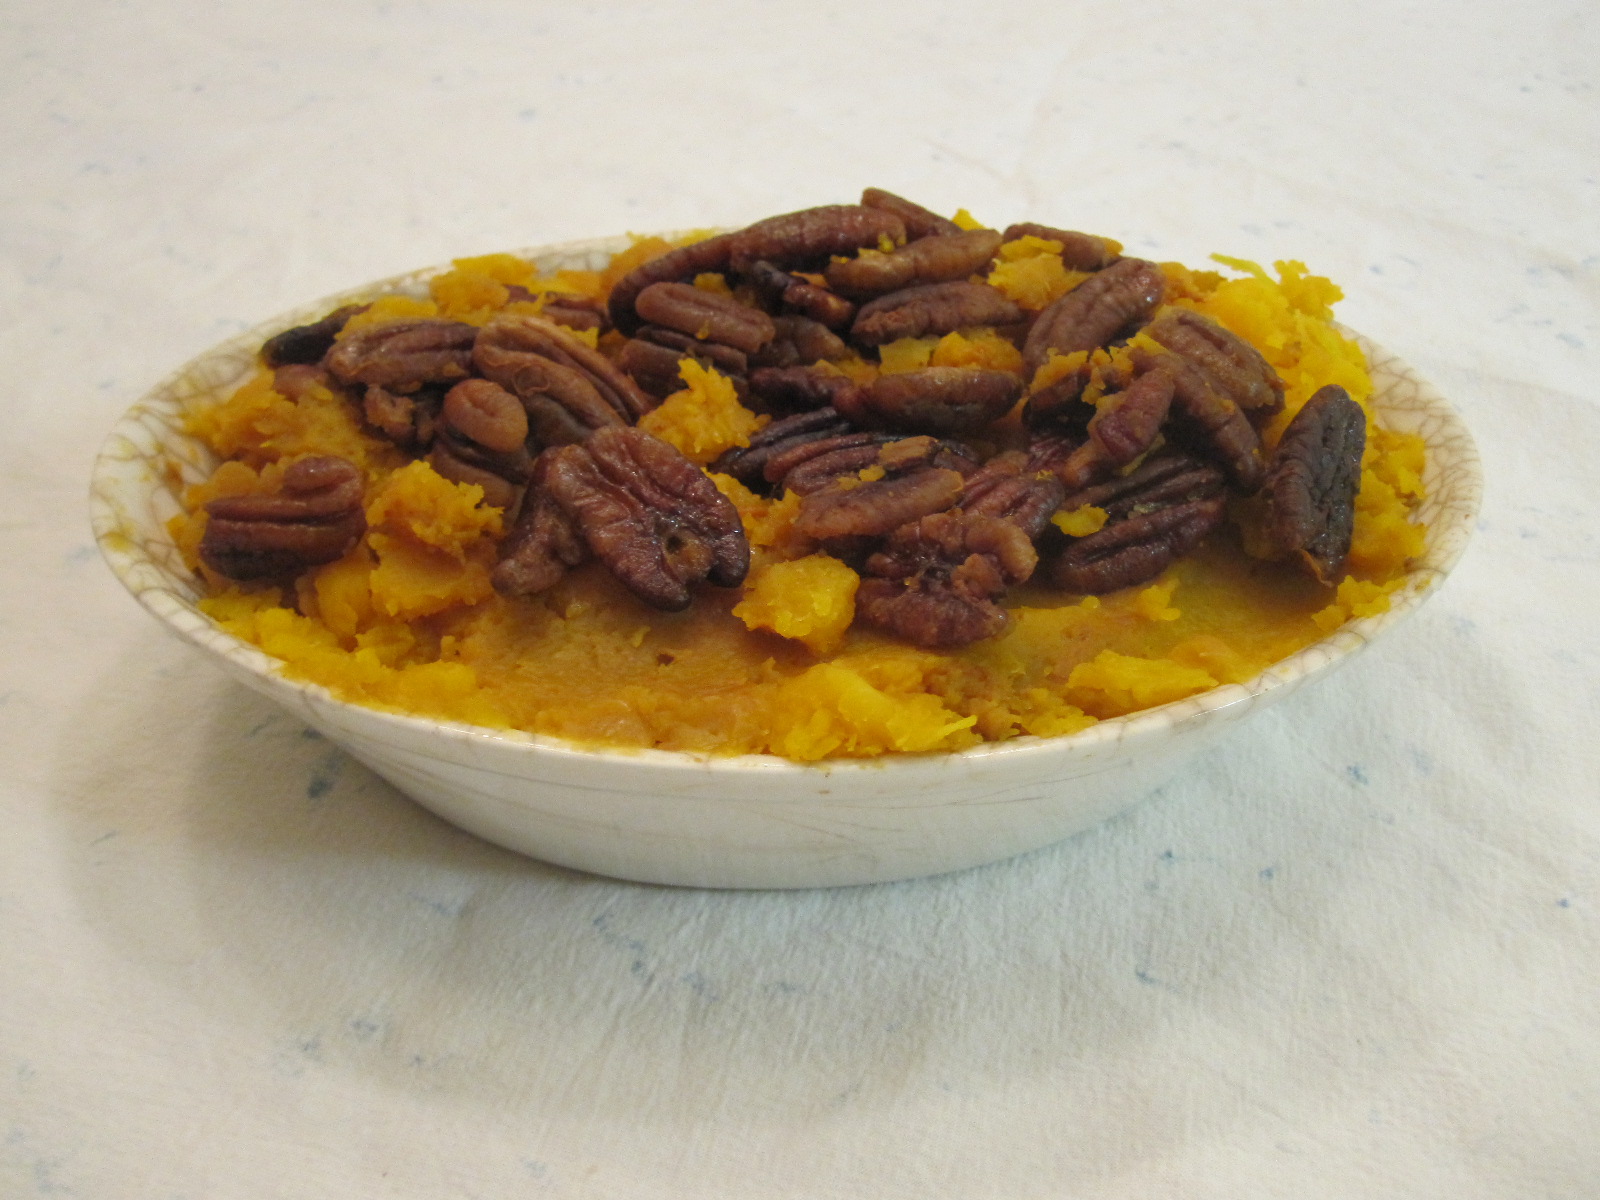 Whipped Butternut Squash with Cloves and Pecans